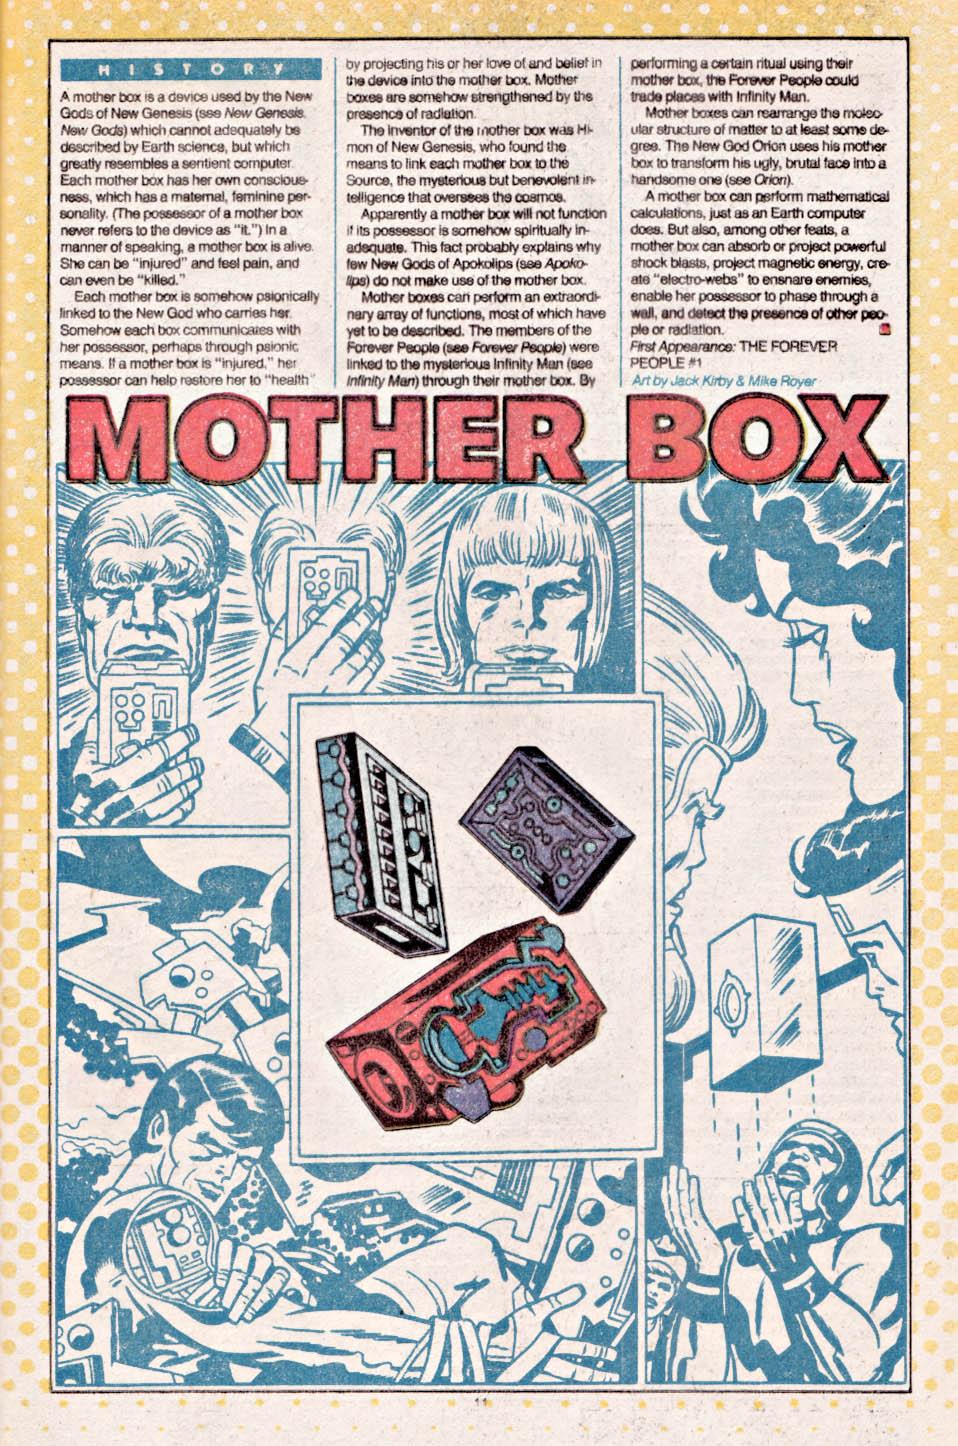 Who's Who The Definitive Directory of the DC Universe #12 - 1986 - Jack Kirby - Mother Box - Arkham Comics 7 rue Broca 75005 Paris